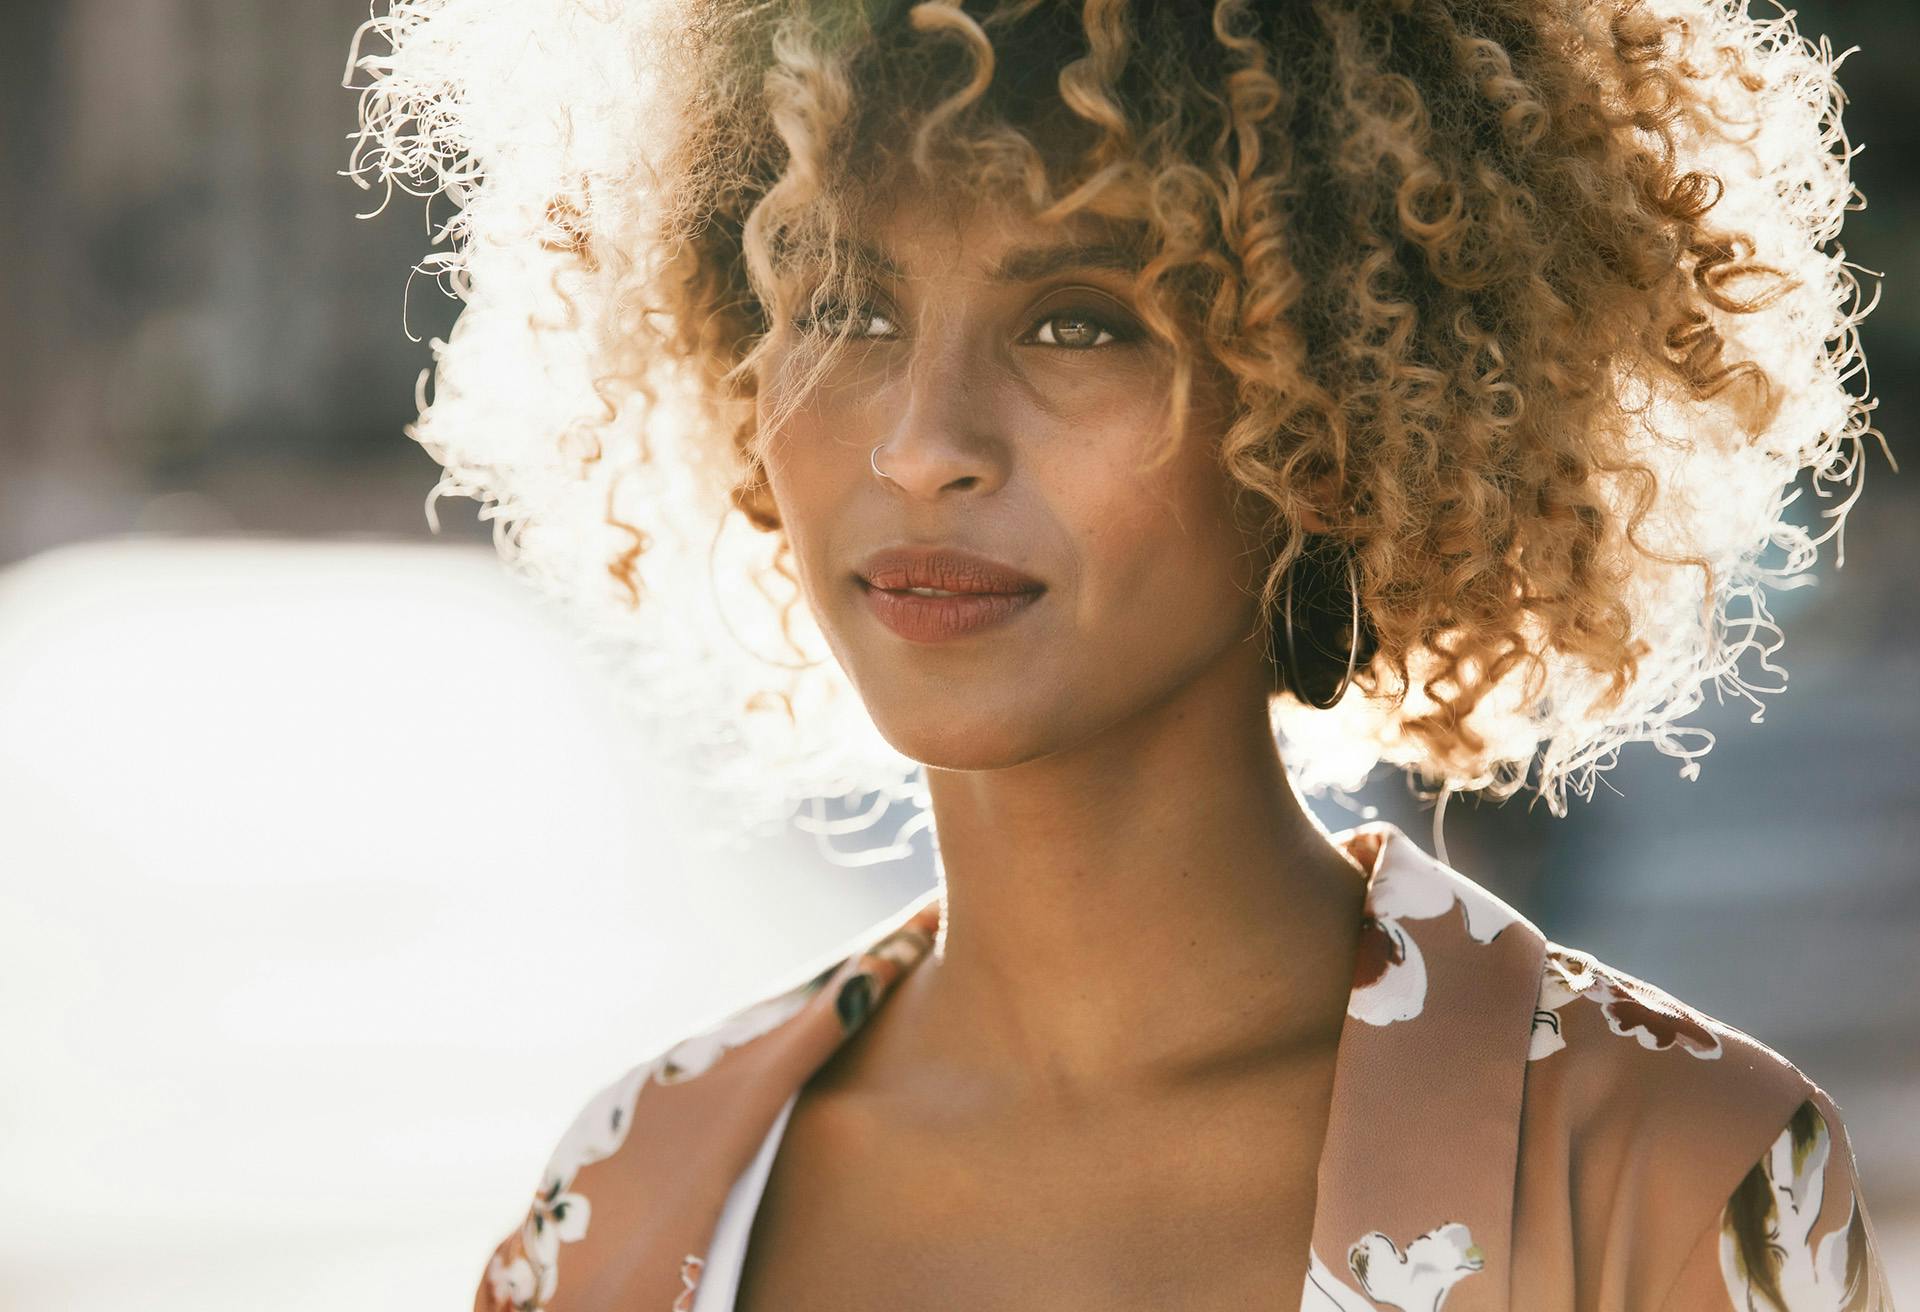 Woman with very curly hair outside